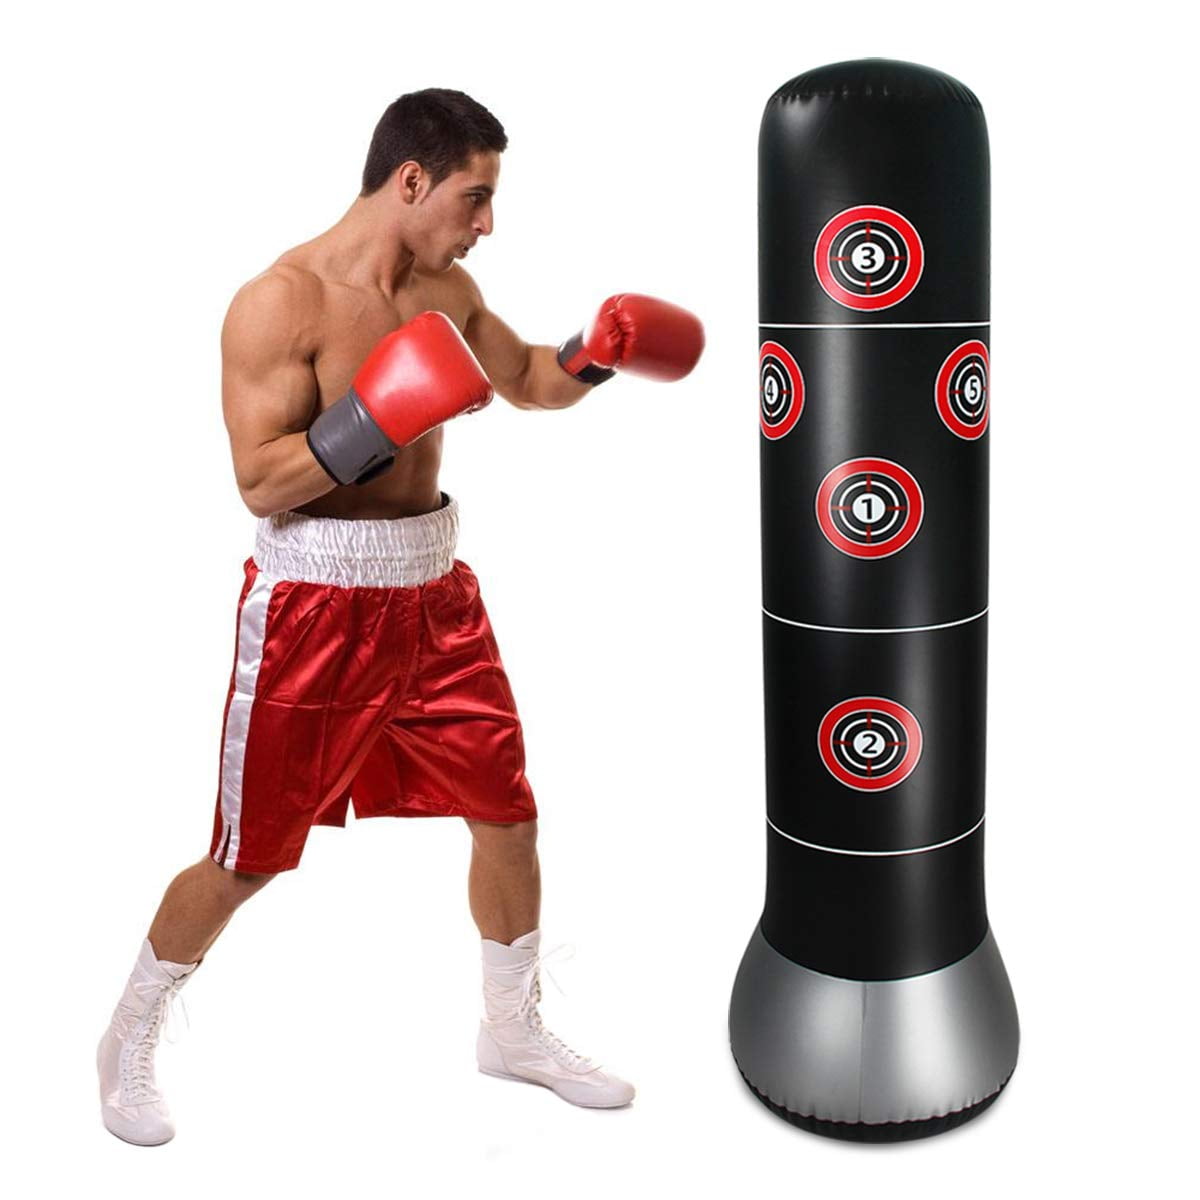 Womdee Fitness Punching Bag Inflatable Boxing Column Tumbler Punching Bag & Thickened Base Heavy Punching Bag Strong Enough for Chrildren and Adults,Exercise & Stress Relief,160 Cm/63 in 